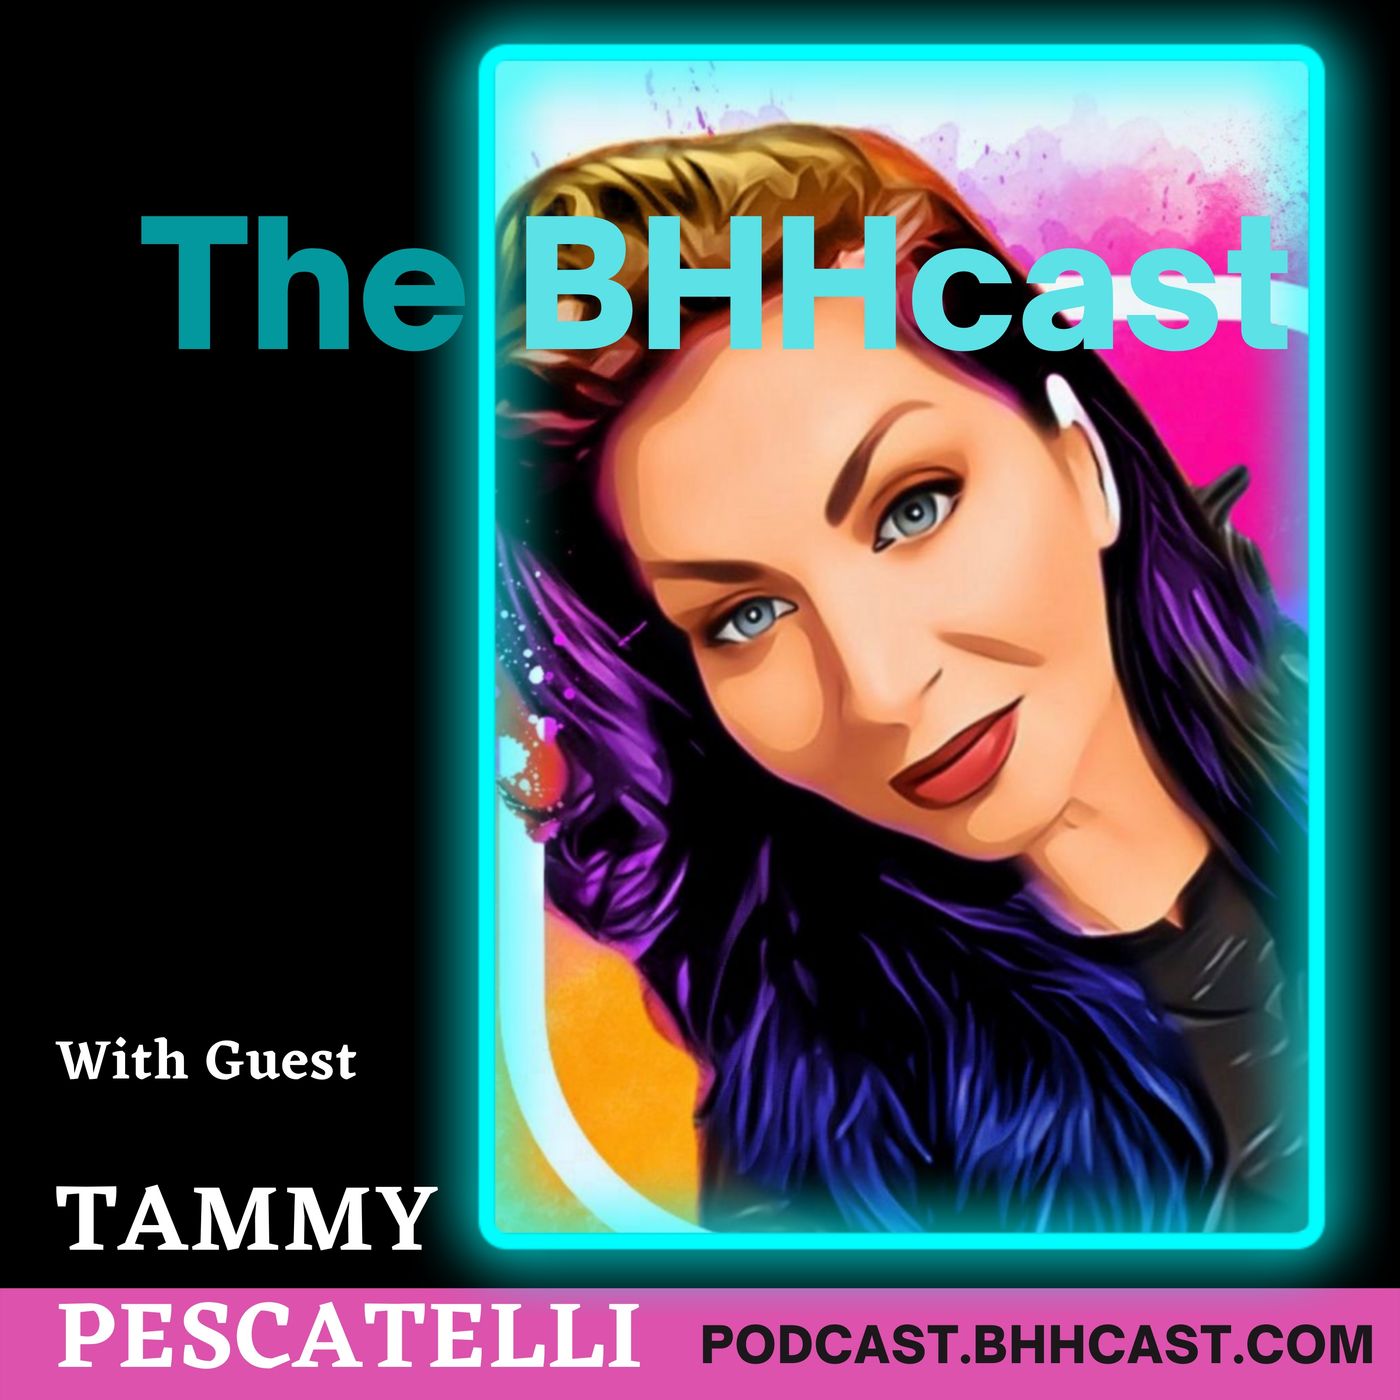 The BHHcast with guest comedian Tammy Pescatelli